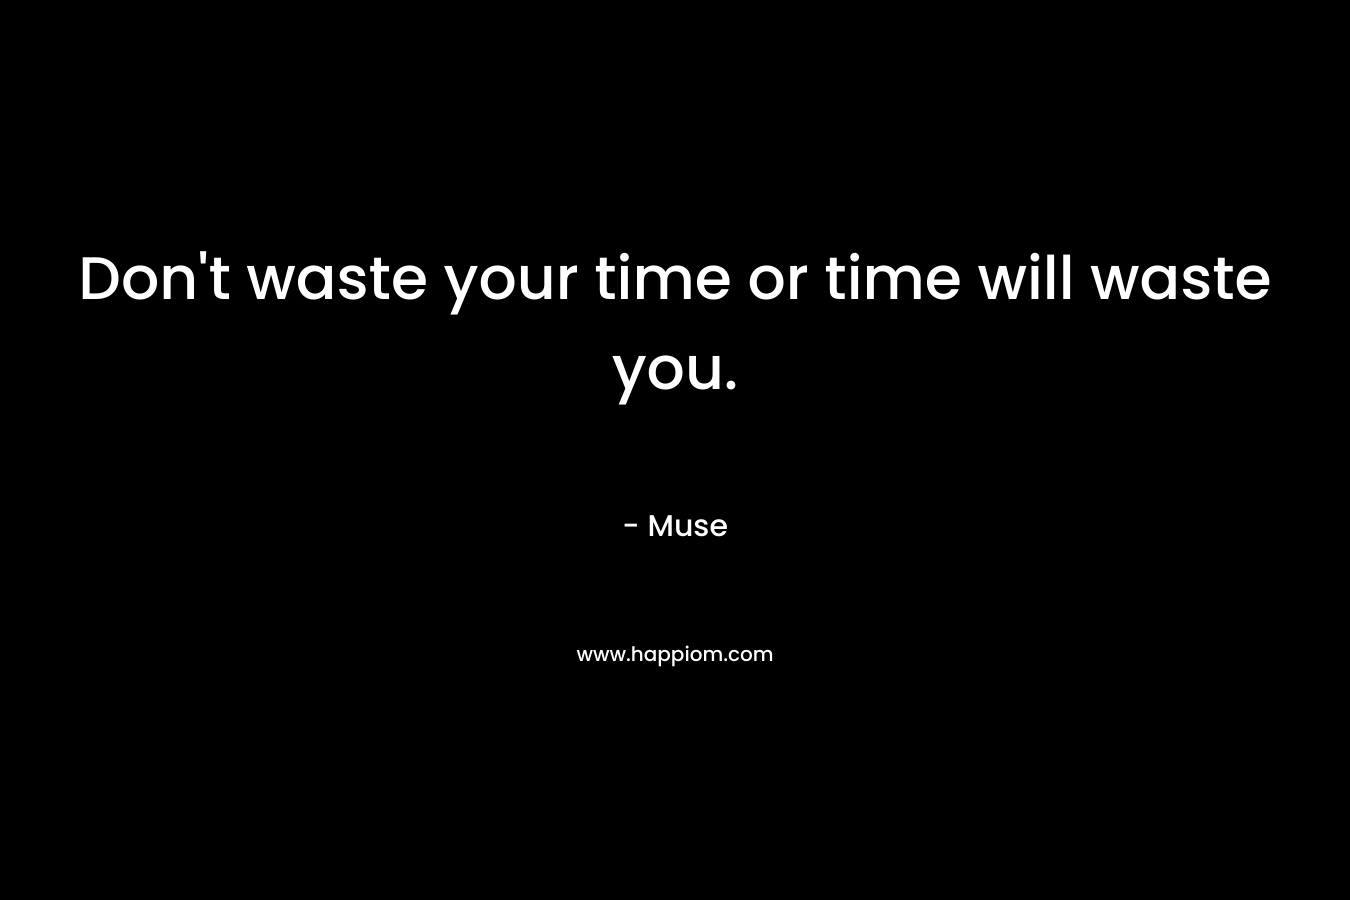 Don't waste your time or time will waste you.